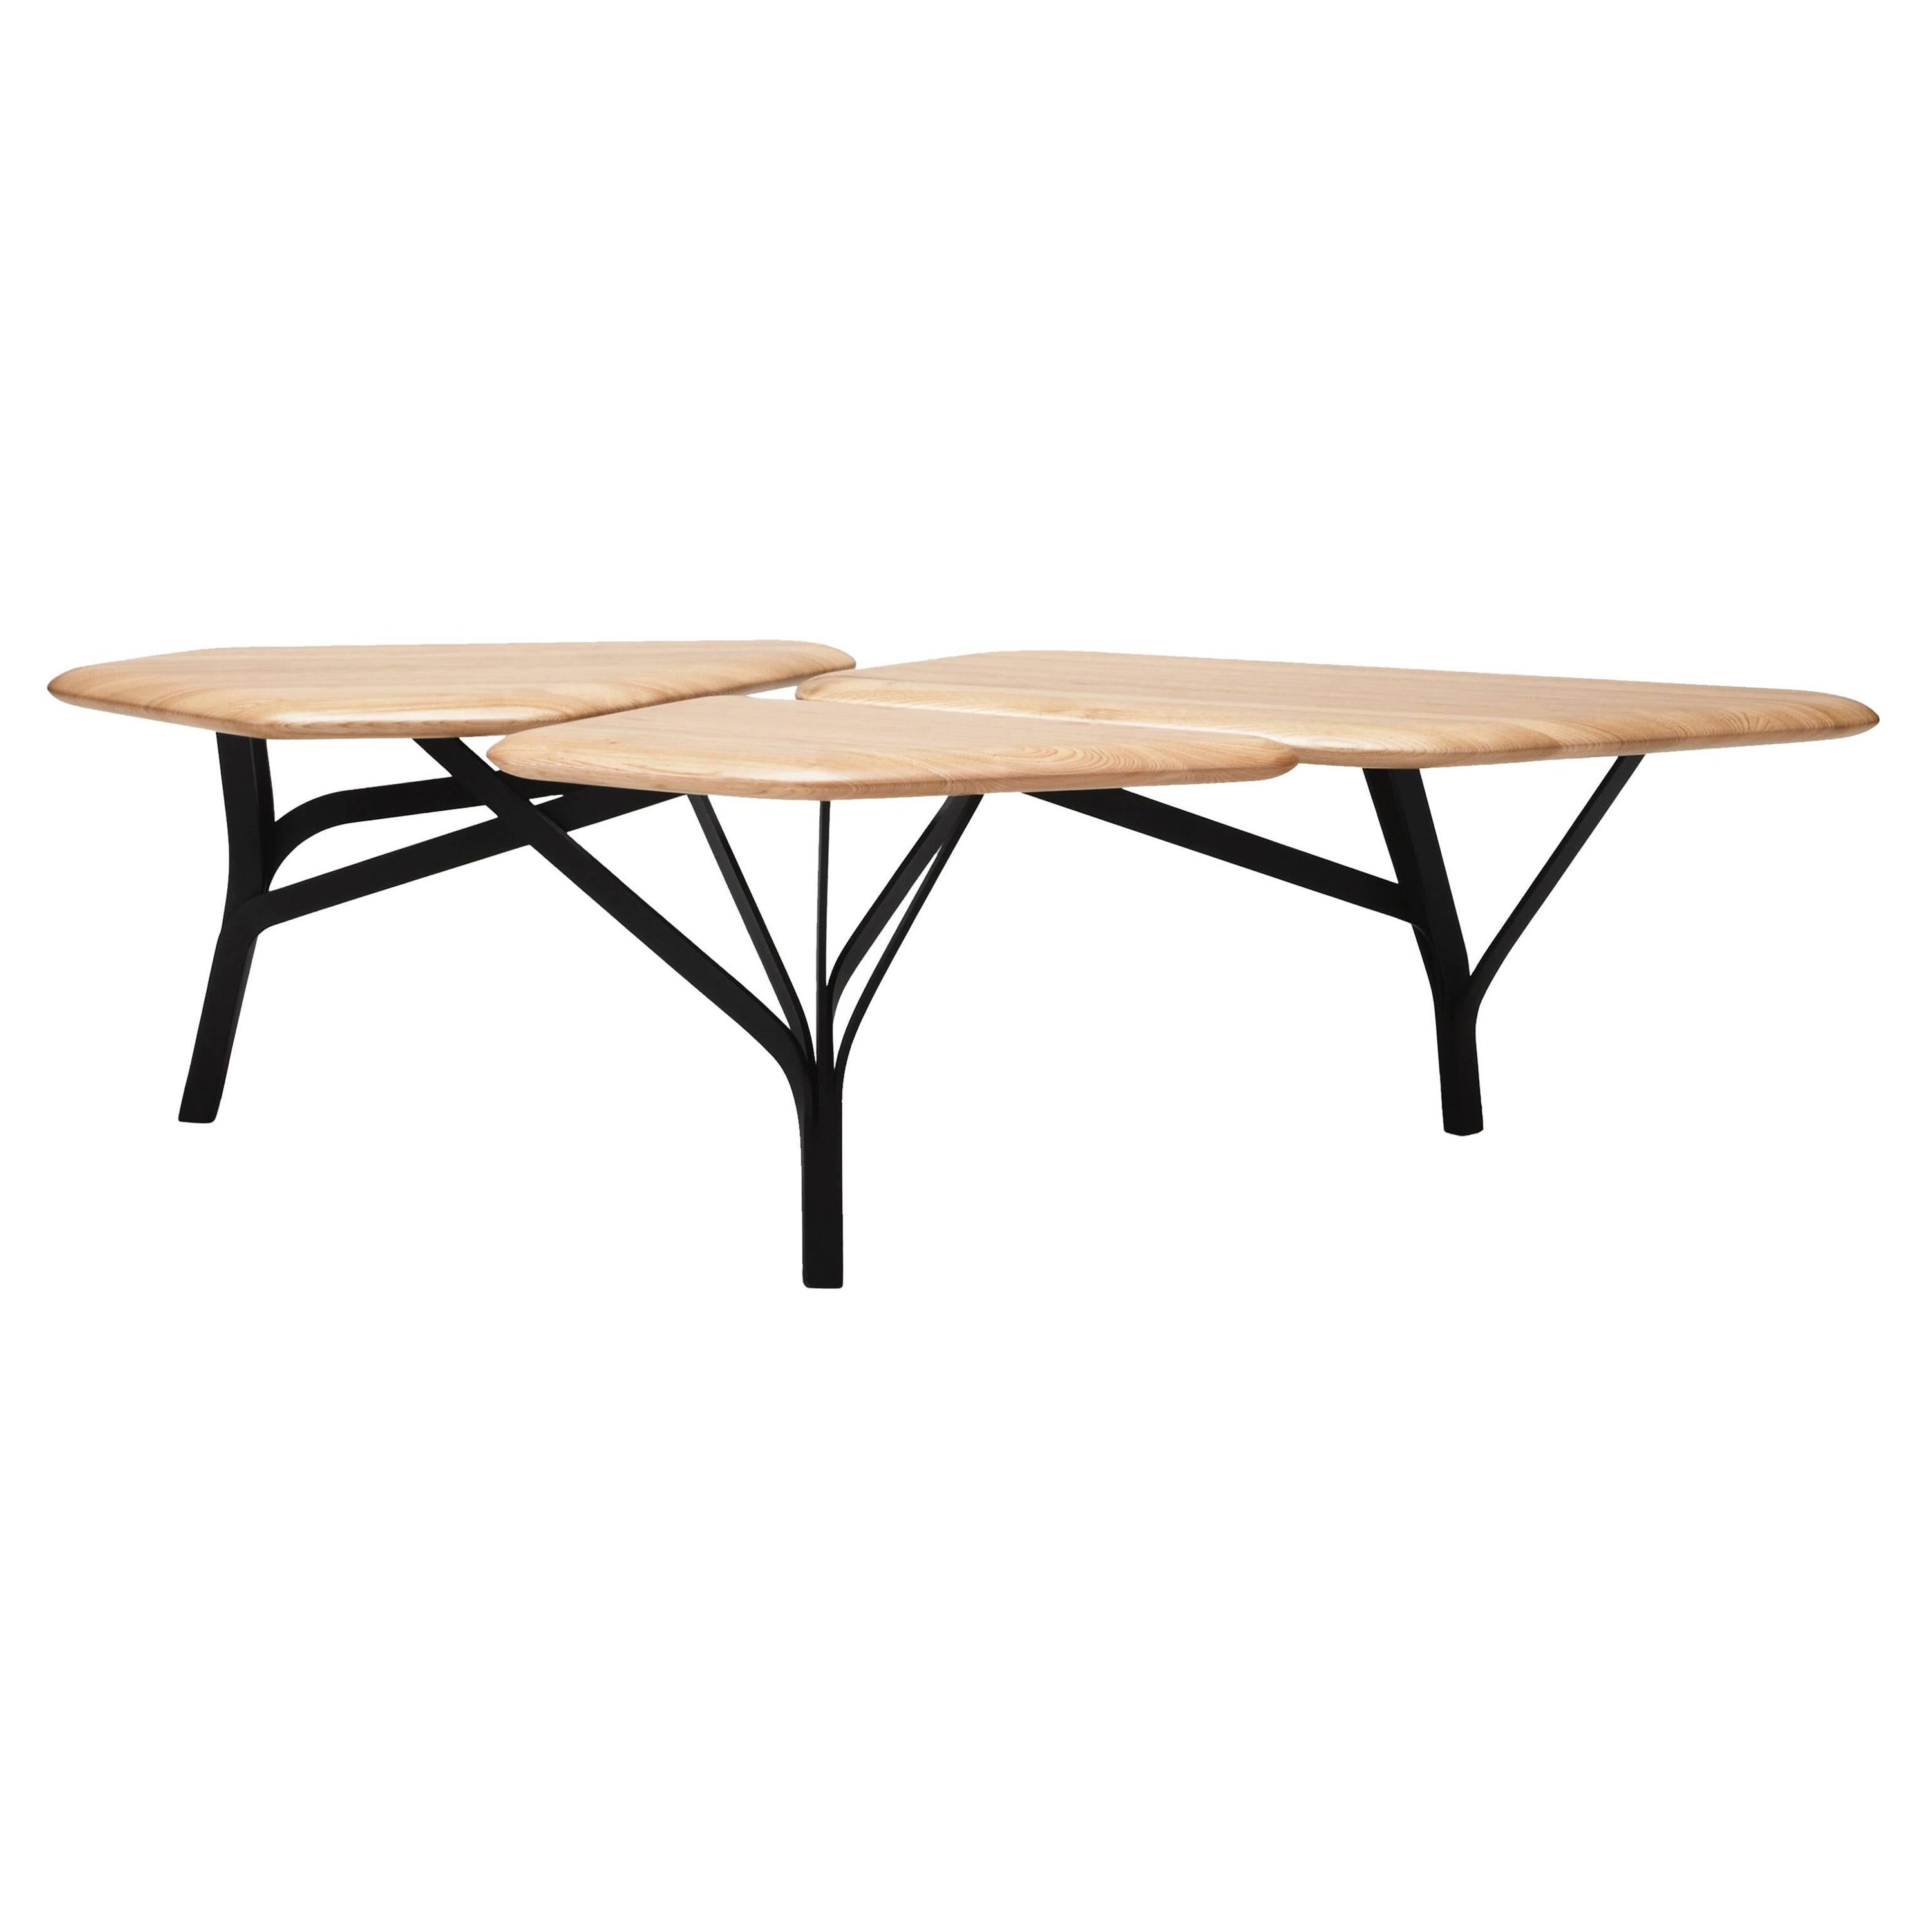 Borghese Coffee Table, Natural Wood Top by Noé Duchaufour Lawrance for La  Chance For Sale at 1stDibs